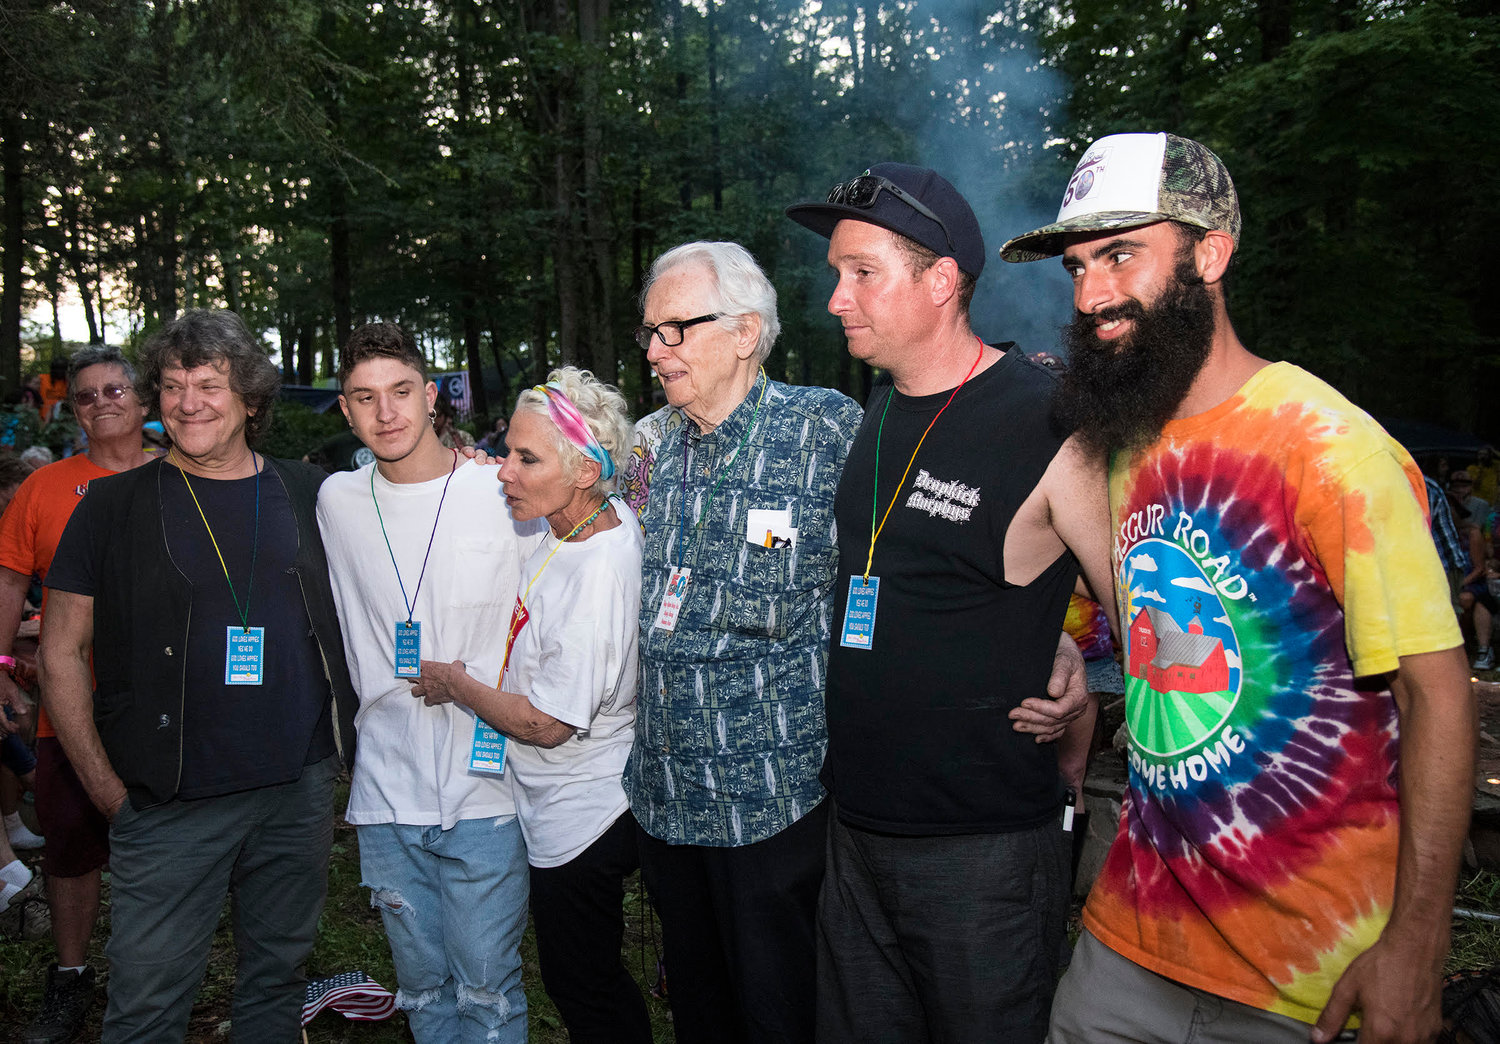 Pictured at the Yasgur Road Reunion Drum Circle are: L-R 1969 Woodstock event producer Michael Lang, his son Laz Lang, Rona Elliot, Lang’s community relations Director for Woodstock, 69, Woodstock sound engineer Bill Hanley, his son, Joe Hanley, and Zach Howard, co-producer (along with his mother, Jeryl Abramson) of the annual reunion and whose family now owns the Yasgur Homestead.